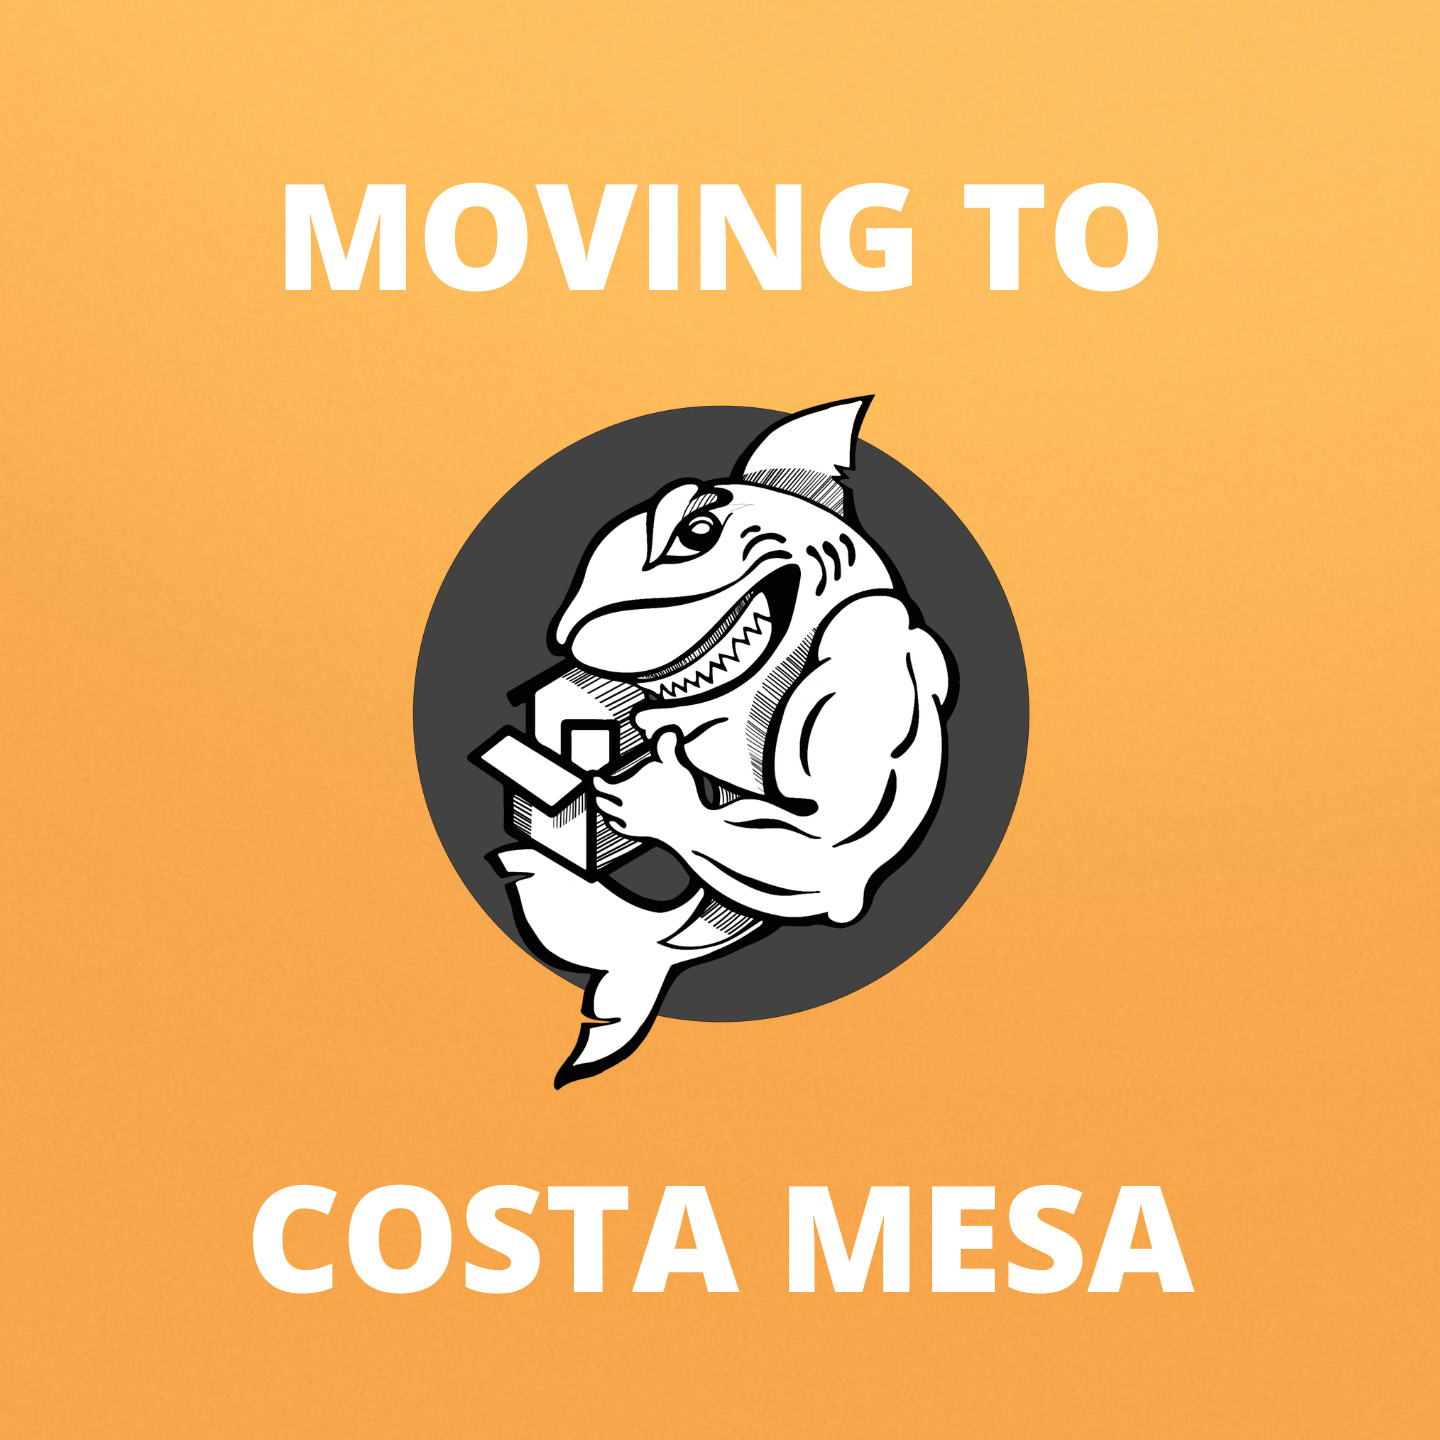 Experience reliable and efficient moving services with our top-rated Costa Mesa moving company. Our professional movers are dedicated to making your transition to your new home seamless and stress-free. With a commitment to quality and customer satisfaction, we provide a range of affordable moving solutions to meet your specific needs. Whether you're moving locally or long-distance, our team has the expertise and equipment necessary to handle your belongings with care. Get in touch today for a customized quote and let us take the hassle out of your move.